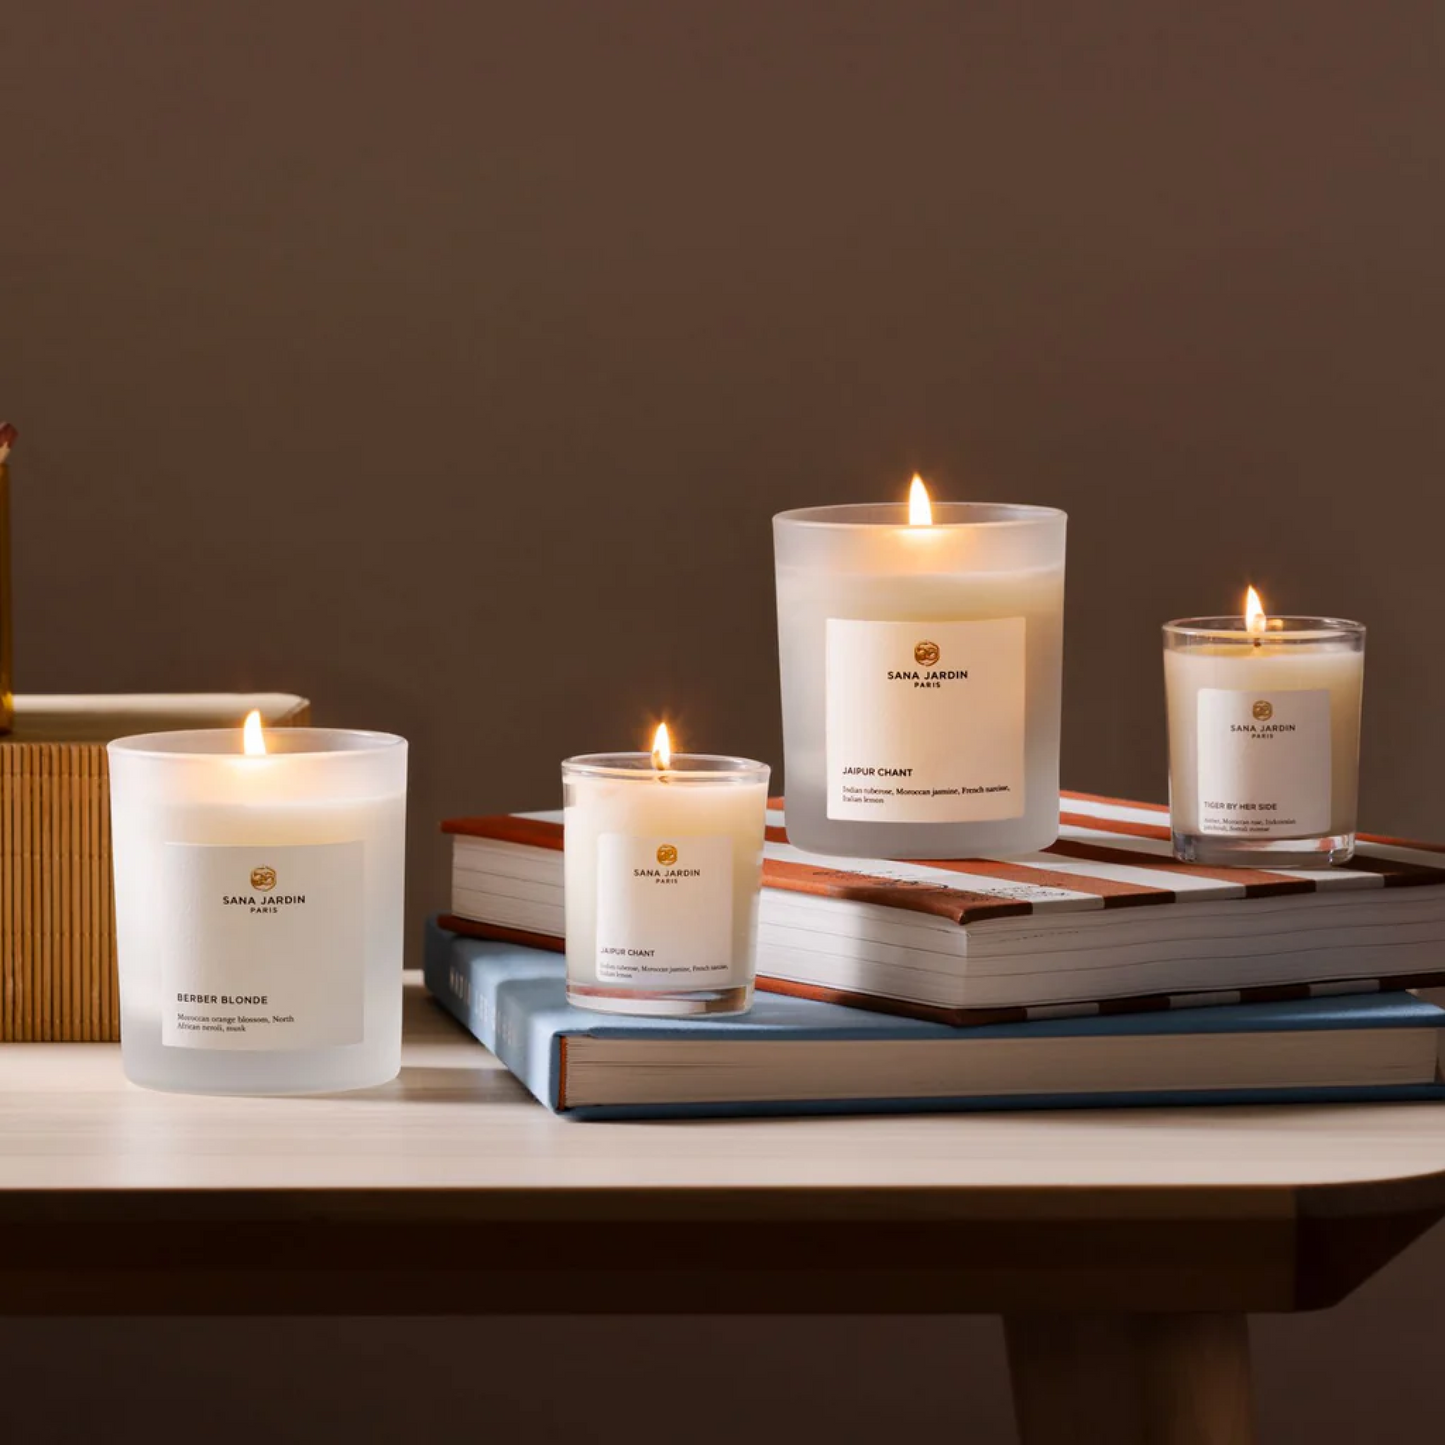 SANDALWOOD TEMPLE SCENTED CANDLE